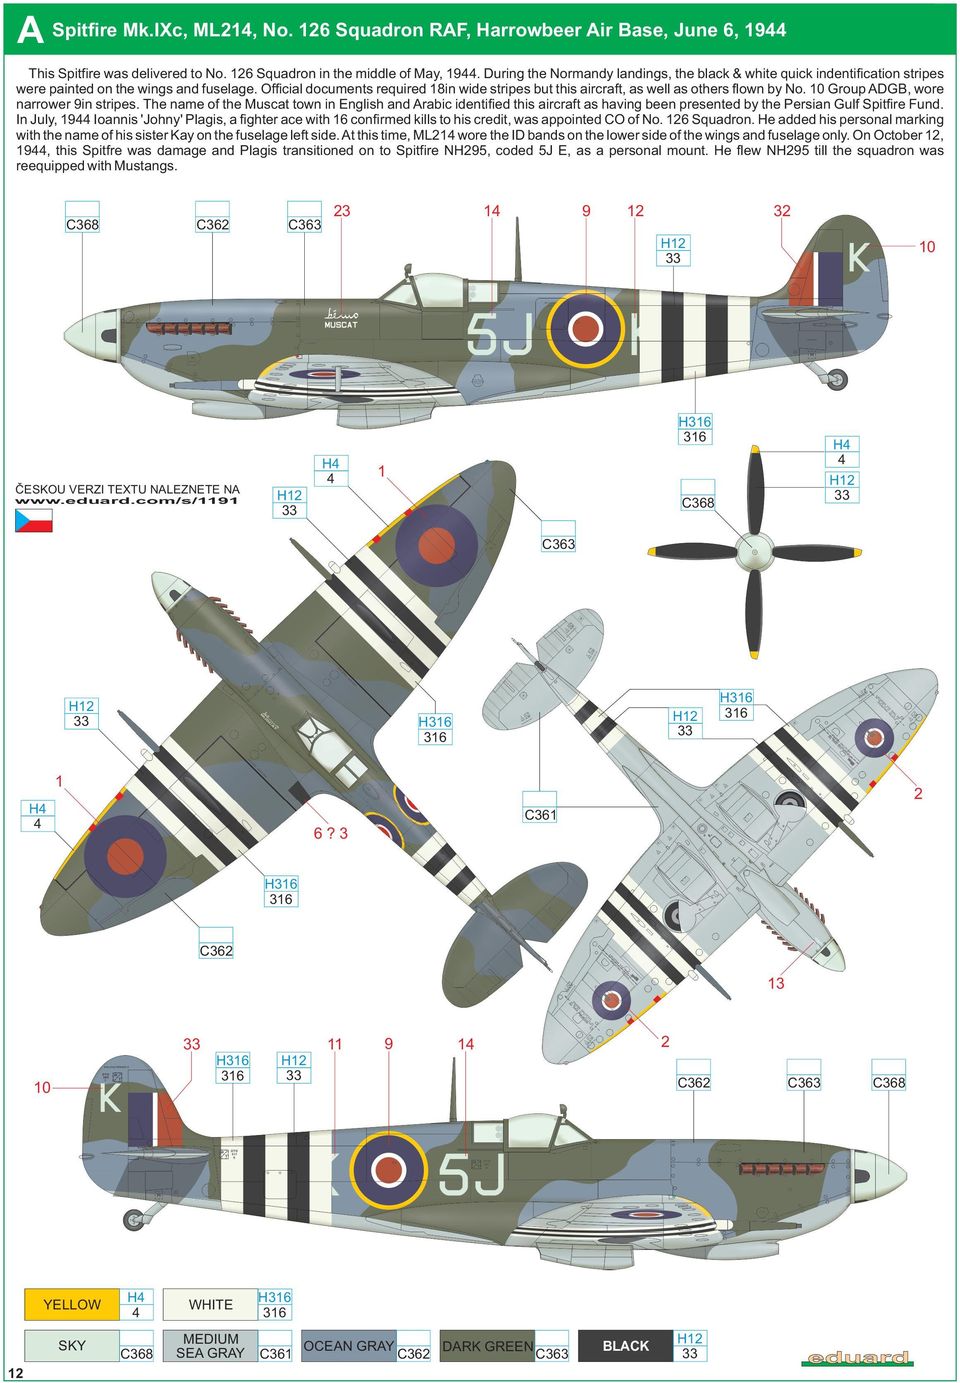 Official documents required 18in wide stripes but this aircraft, as well as others flown by No. 10 Group AGB, wore narrower 9in stripes.